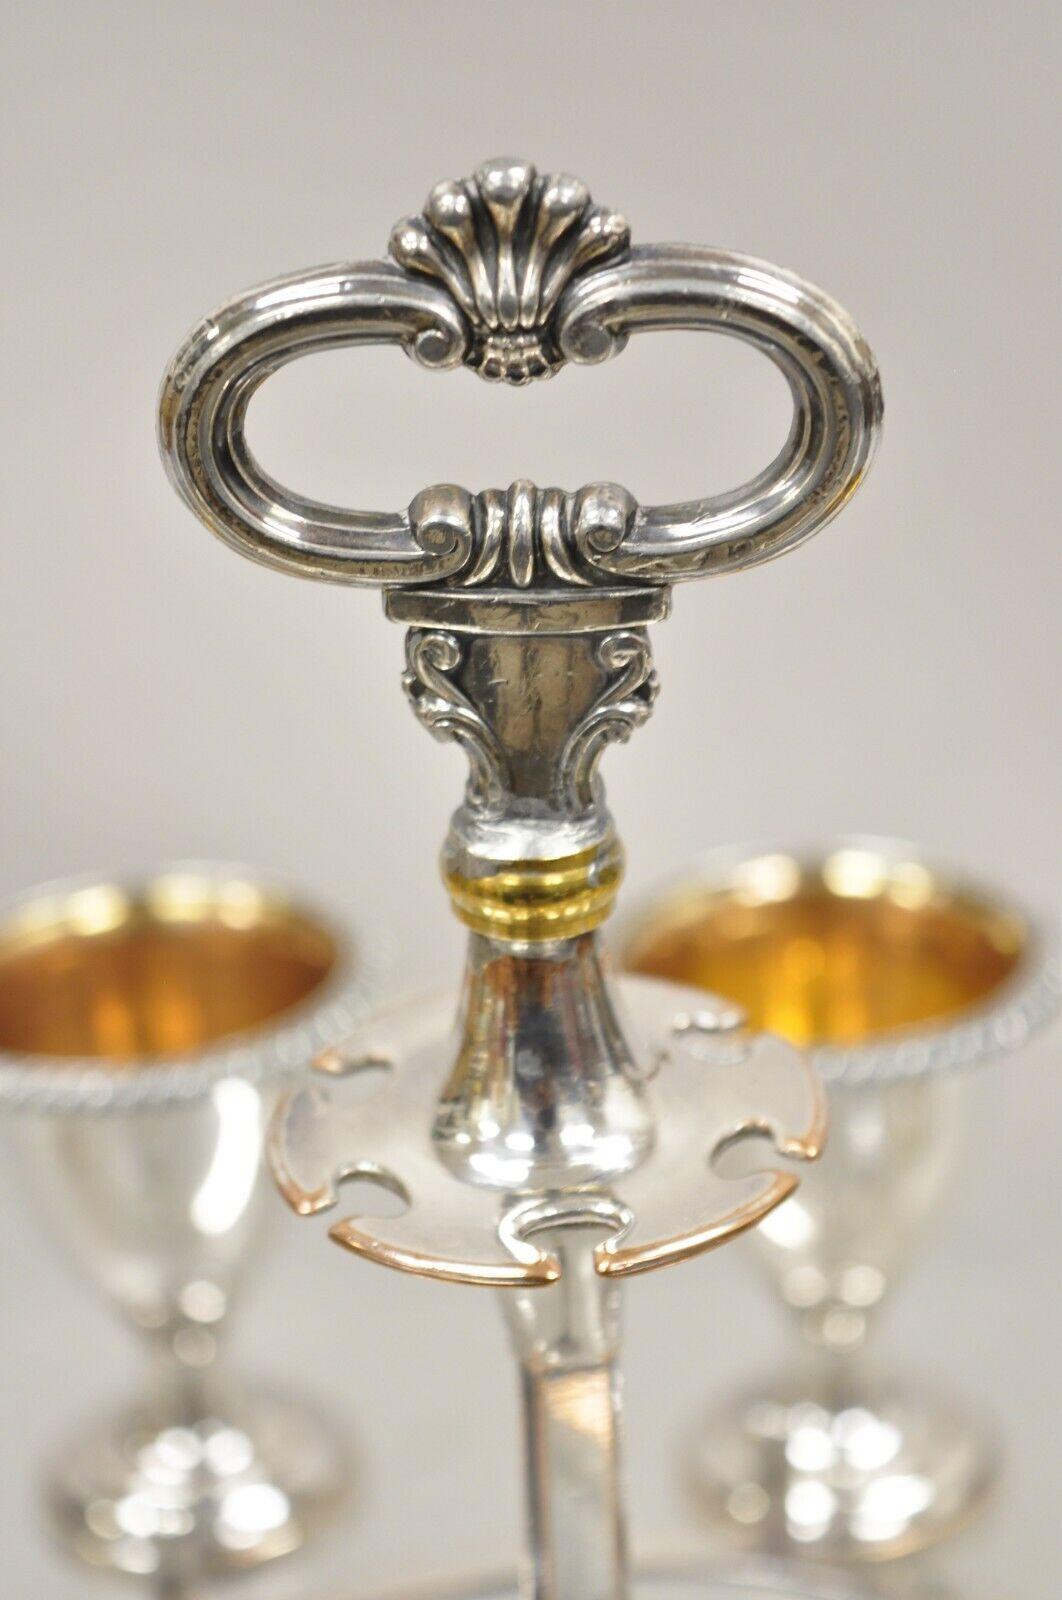 Antique Victorian Silver Plated Egg Server with Spoon Set - Serving for 6 For Sale 5